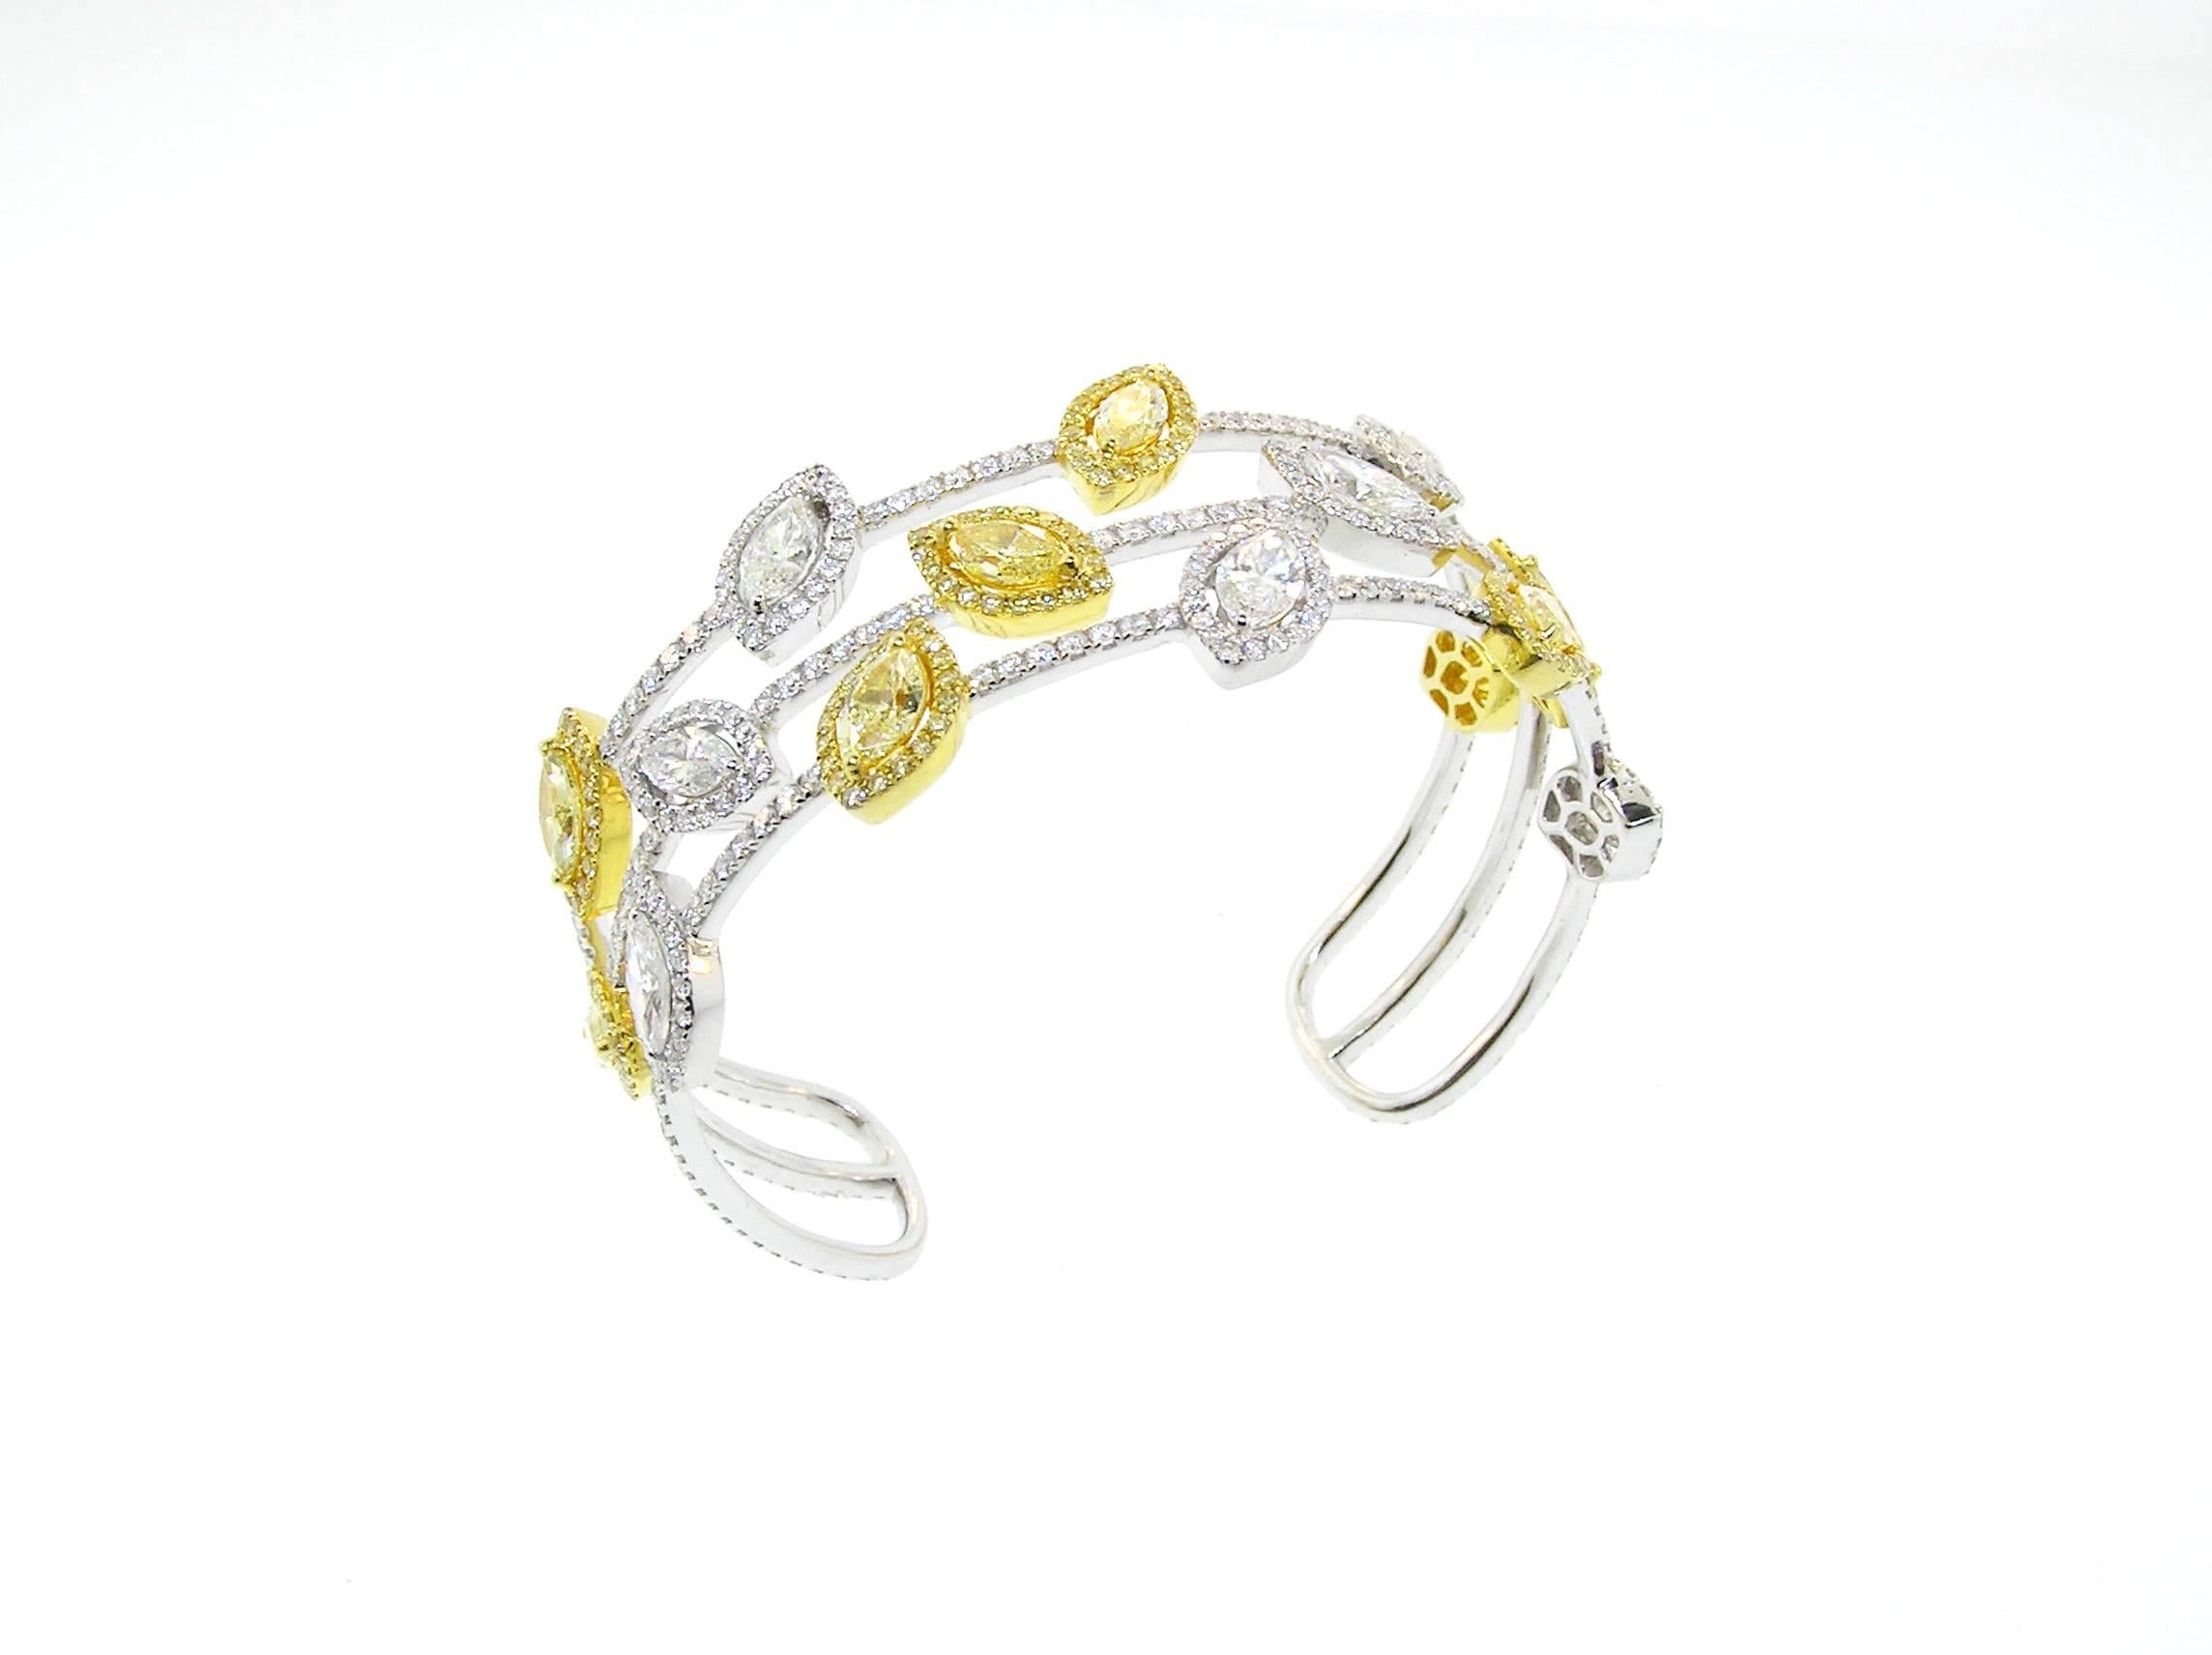 This flexible cuff Bracelet features 13.24 Carats of Natural Canary and White Diamonds.  Very Rare to find Marquise cut Canary Diamonds, as well as matching ones!  G.I.A. Certified.